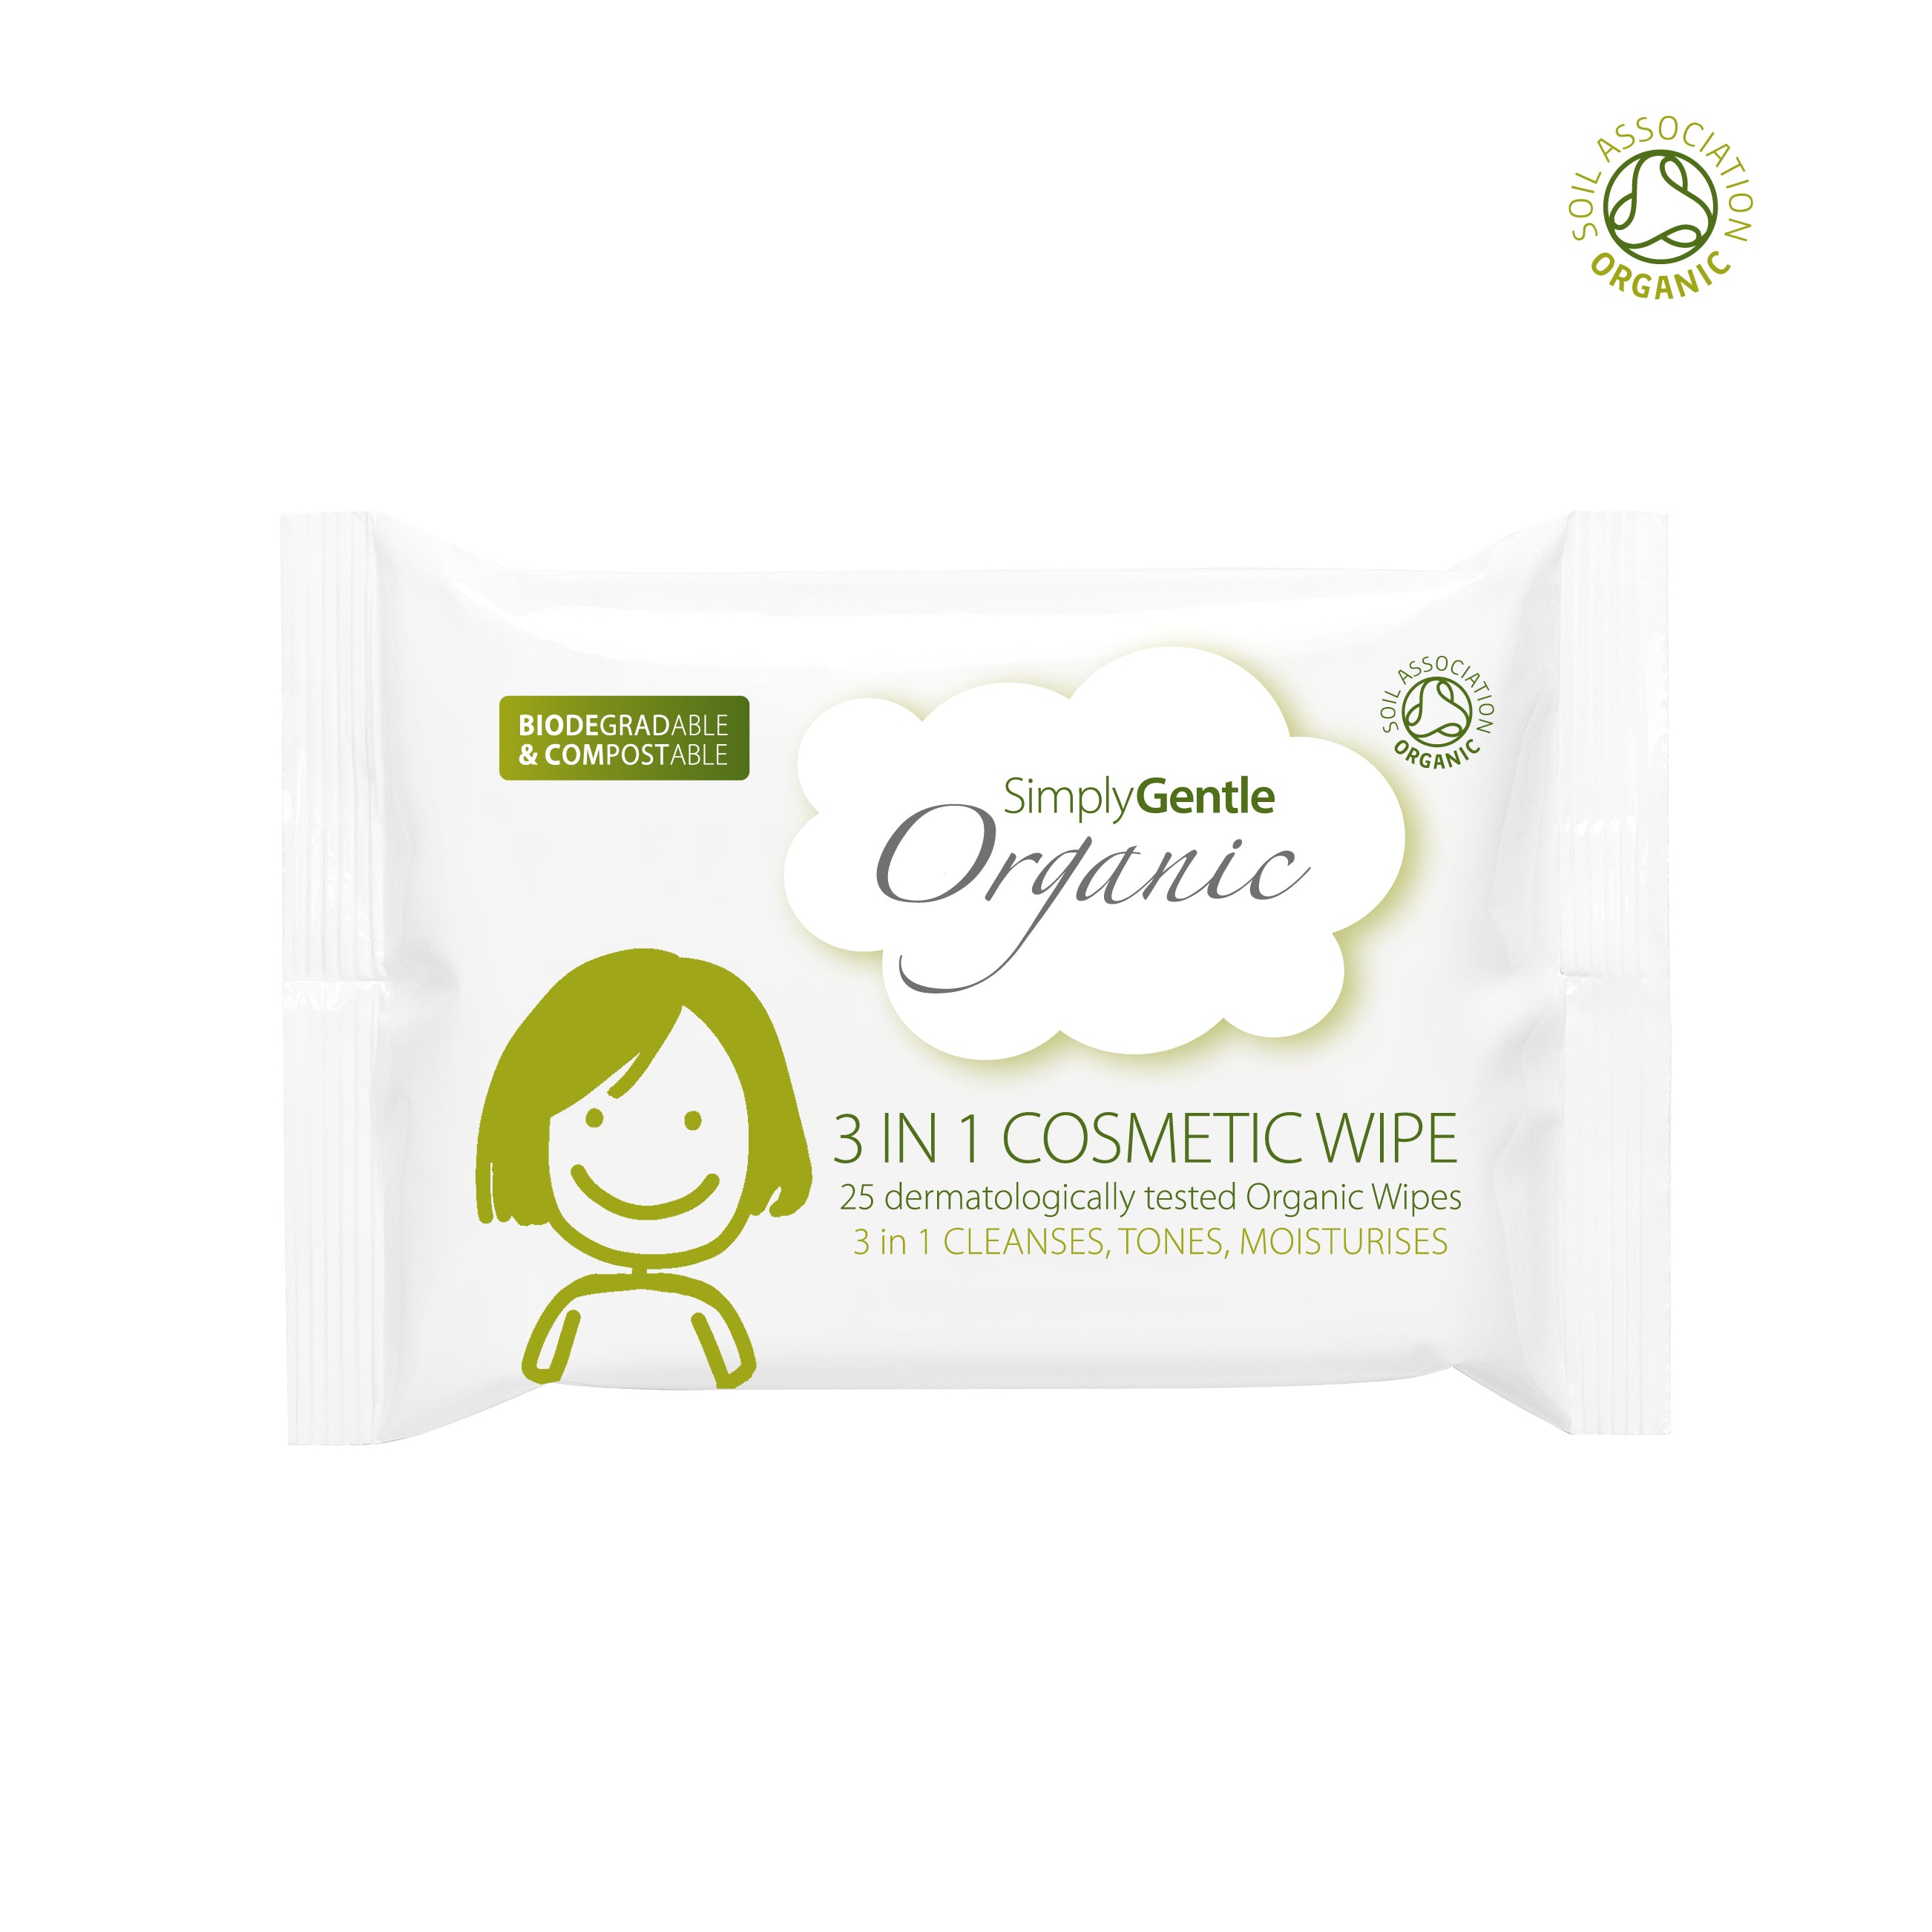 Simply Gentle Organic 3 in 1 Cosmetic Wipe made with a gentle organic lotion containing aloe vera, lavender oil, and a range of flower oils, our 3 in 1 Cosmetic Wipes cleanse, tone, and moisturise. Soft to use, and with a beautiful, natural fragrance, they are dermatologically tested. 100% certified organic cotton. Soil Association approved.